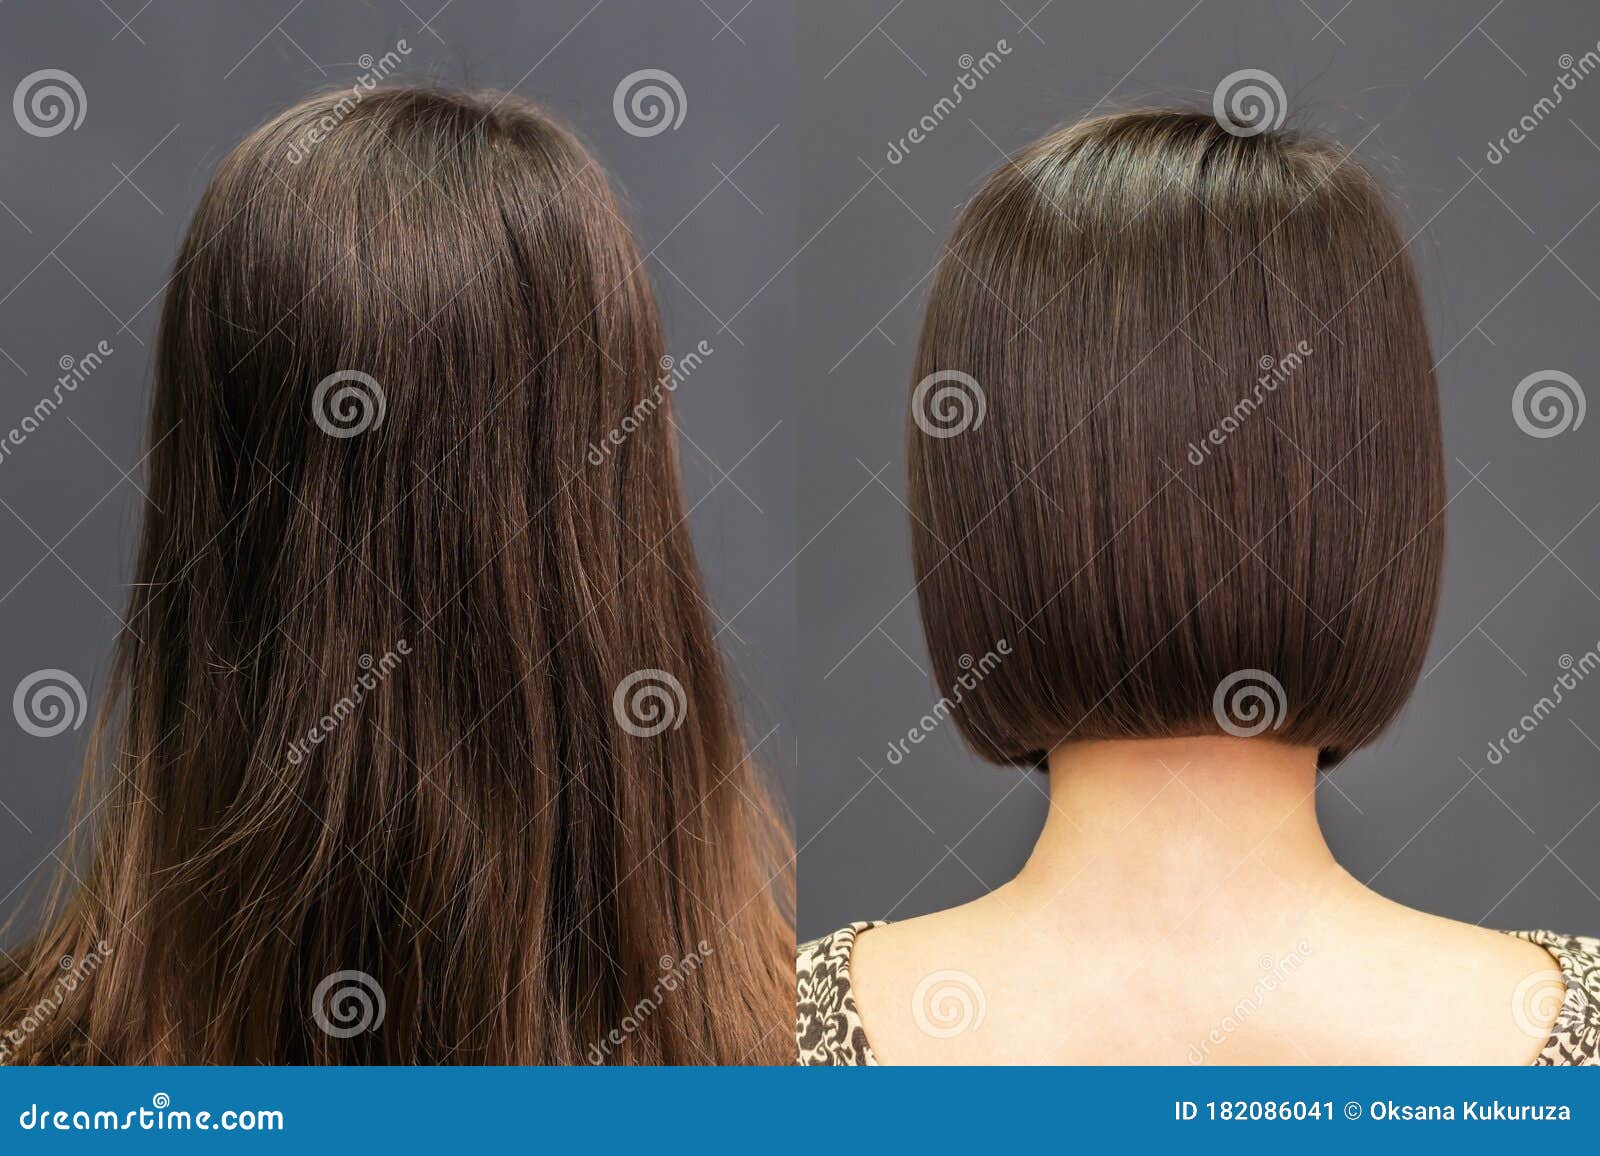 Hair before and after Haircut Stock Image - Image of bright, hair: 182086041